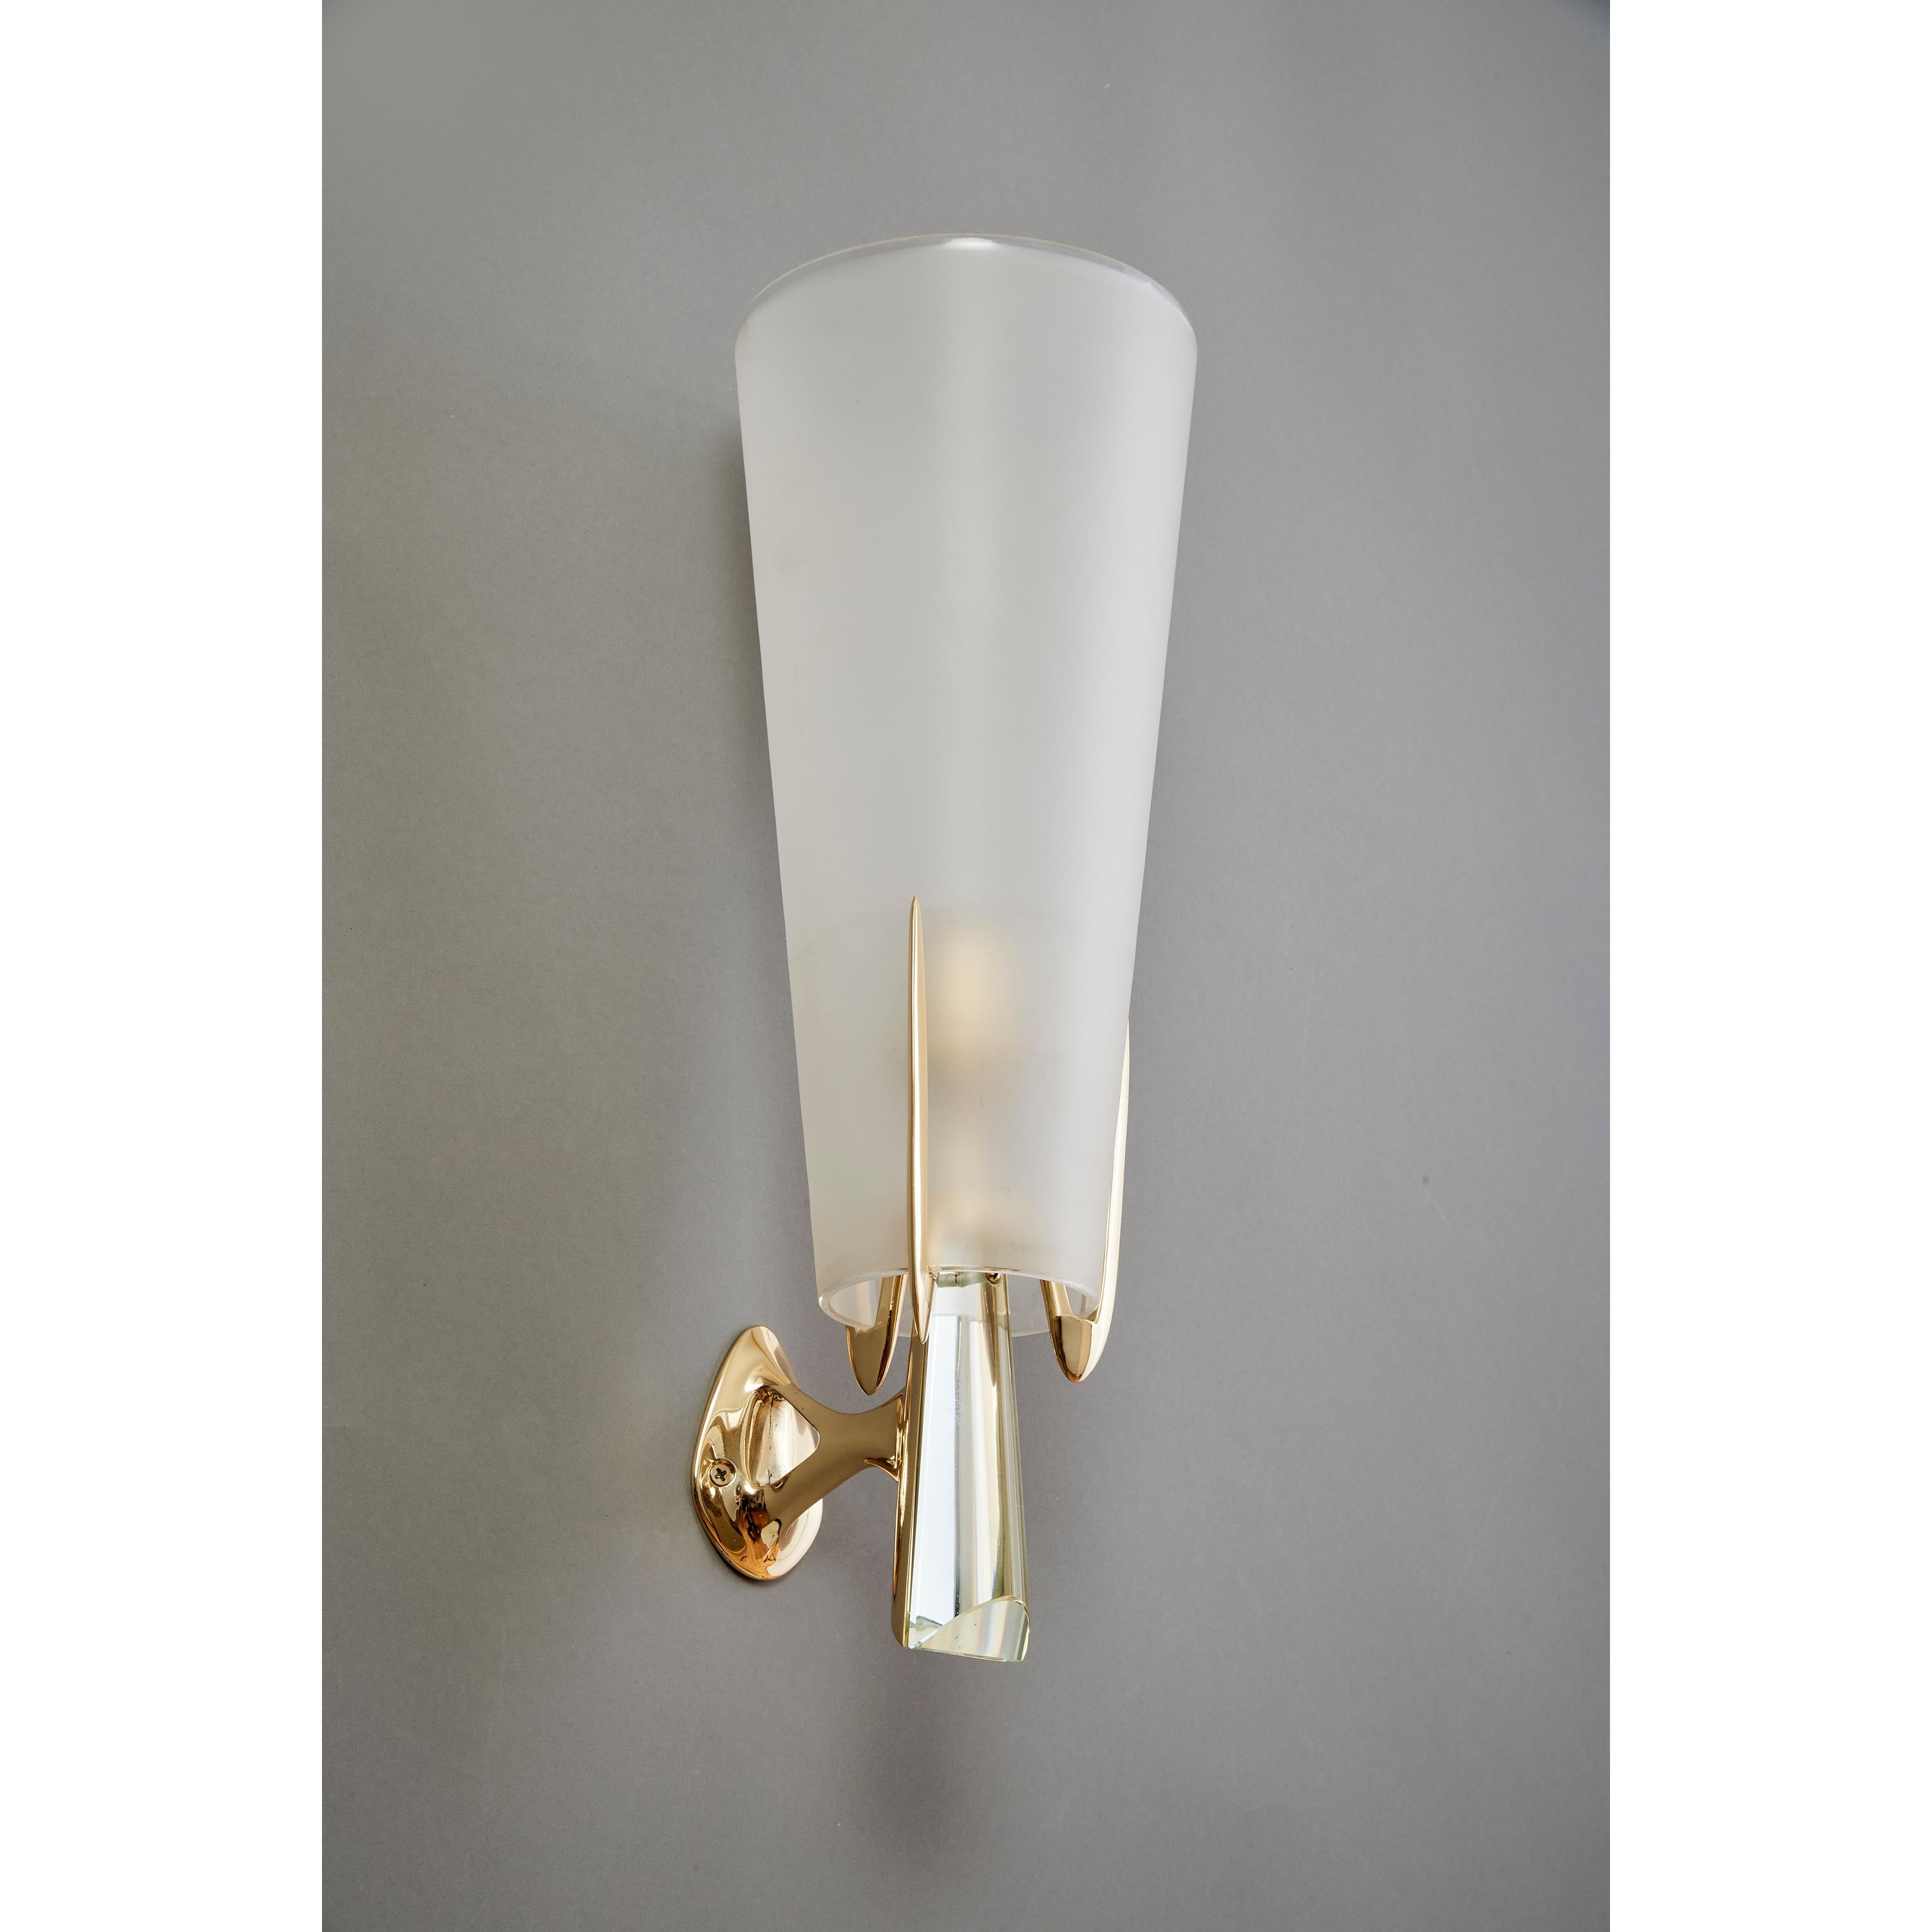 Max Ingrand for Fontana Arte: Rare Sconces in Brass and Crystal, Italy 1955 In Excellent Condition For Sale In New York, NY